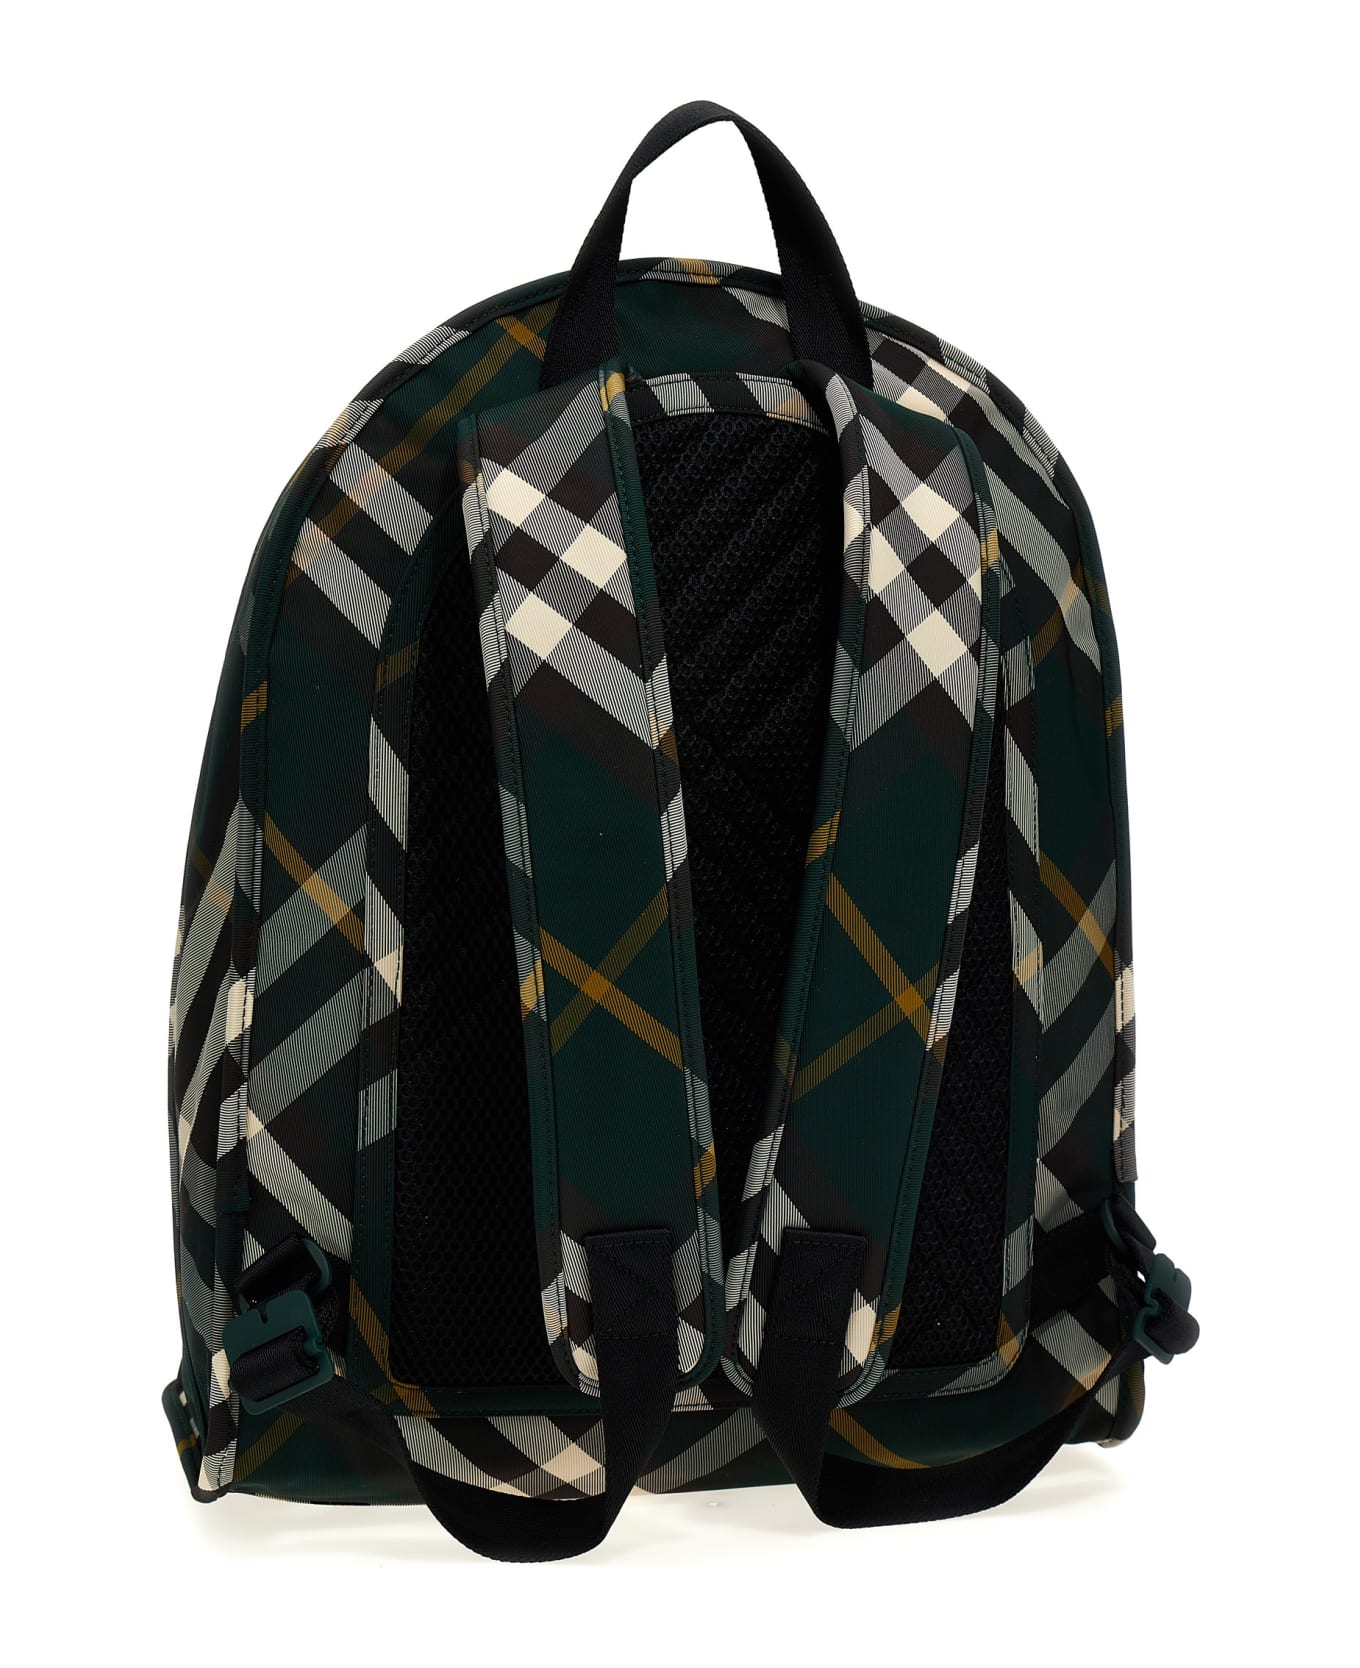 Burberry 'shield' Backpack - Green